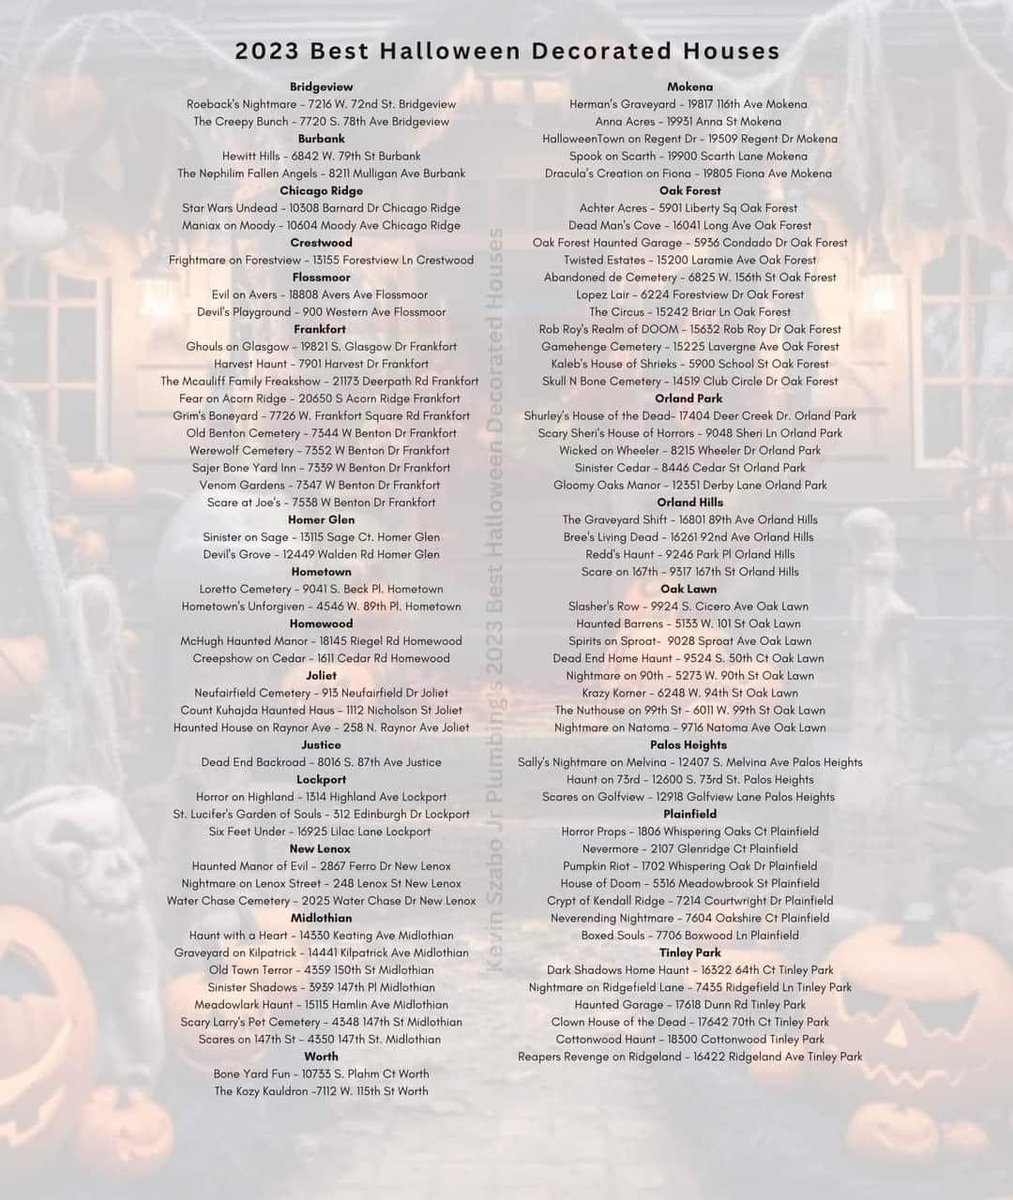 Here’s a list of haunted houses right in your neighborhood!!!

I love Halloween 🎃
#Halloween #HauntedHouses #SpookySeason #NeighborhoodFun #HalloweenFun